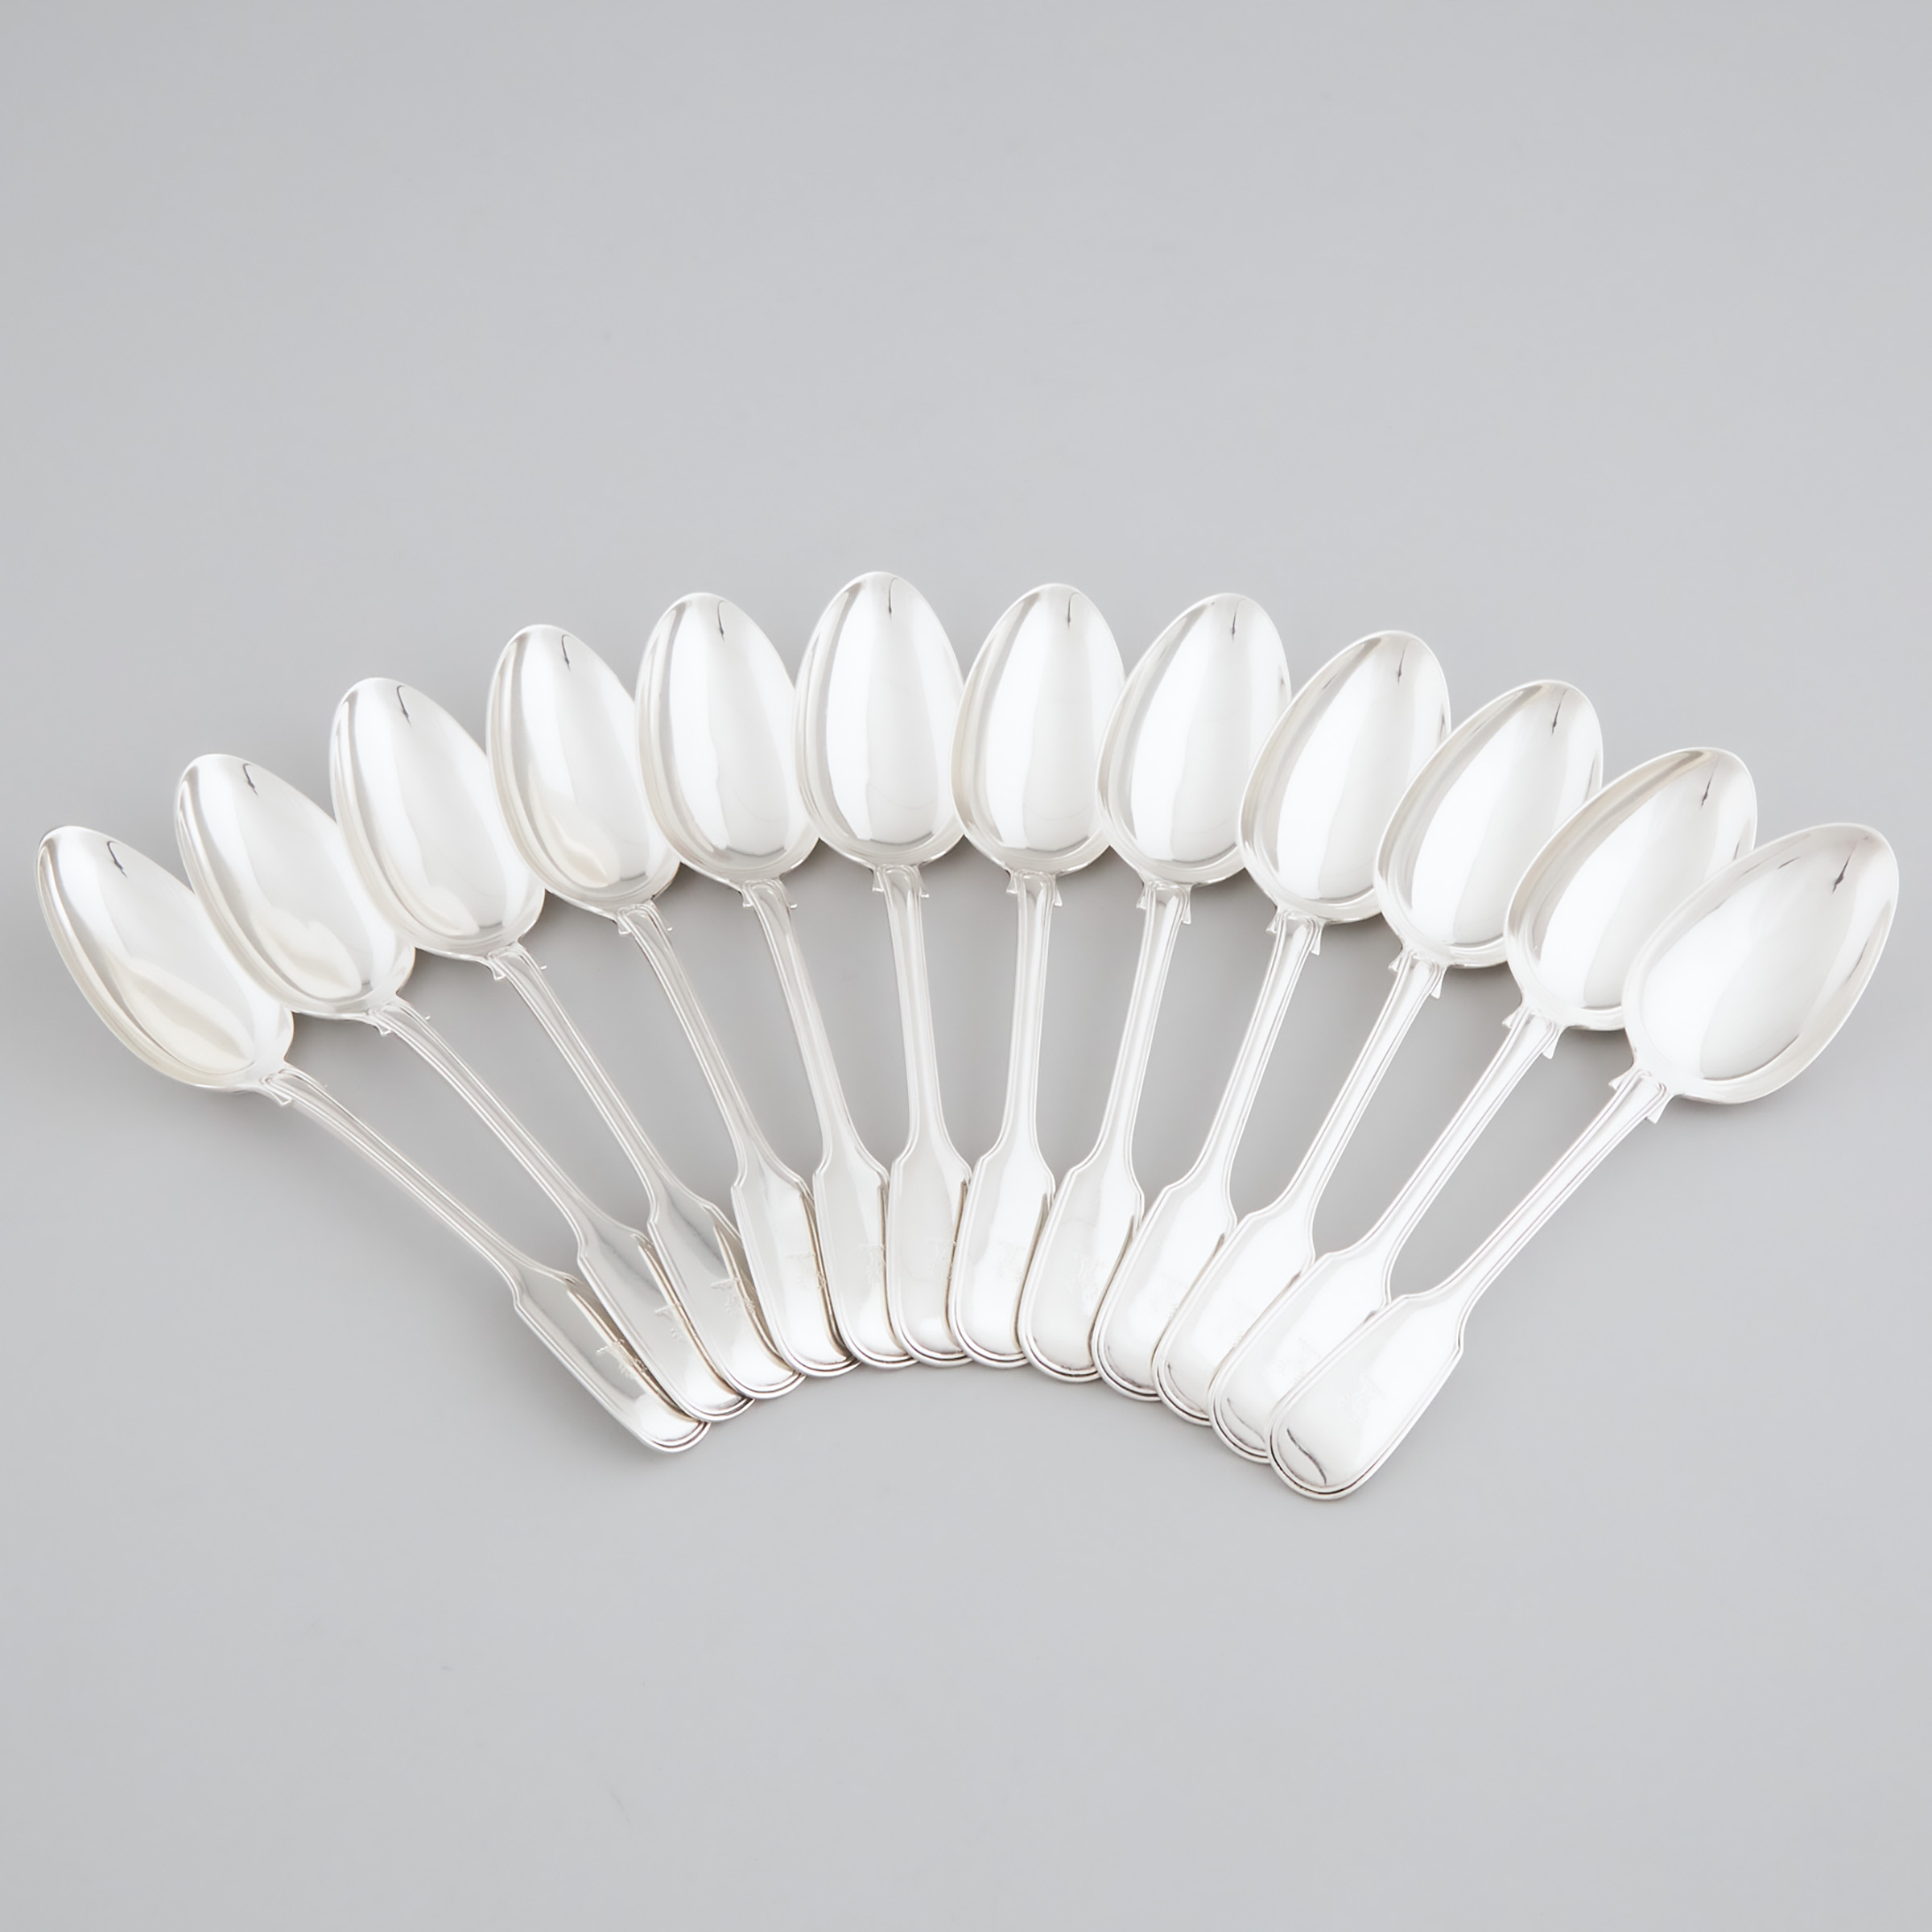 Twelve Victorian Silver Fiddle and Thread Pattern Table Spoons, Elizabeth Eaton, London, 1846